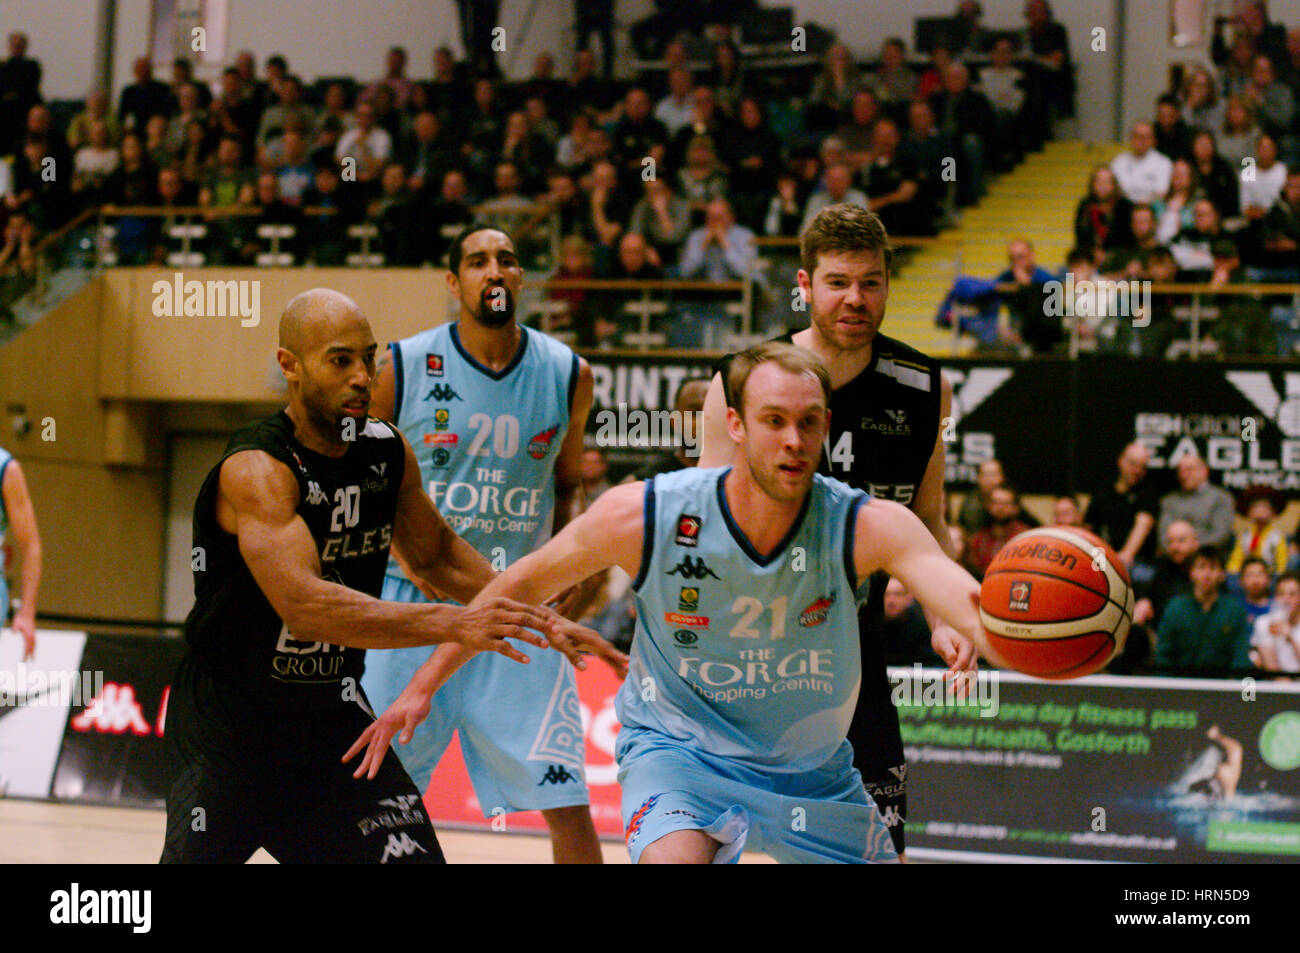 Newcastle upon Tyne,England, 3rd March 2017. Lewis Thomas, number 21, of Glasgow Rocks passing the ball during the match against Esh Group Eagles Newcastle in the British Basketball League match at Sport Central. Watching are Fabulous Flournoy, Kieron Achara and Scott Martin. Credit: Colin Edwards/Alamy Live News Stock Photo